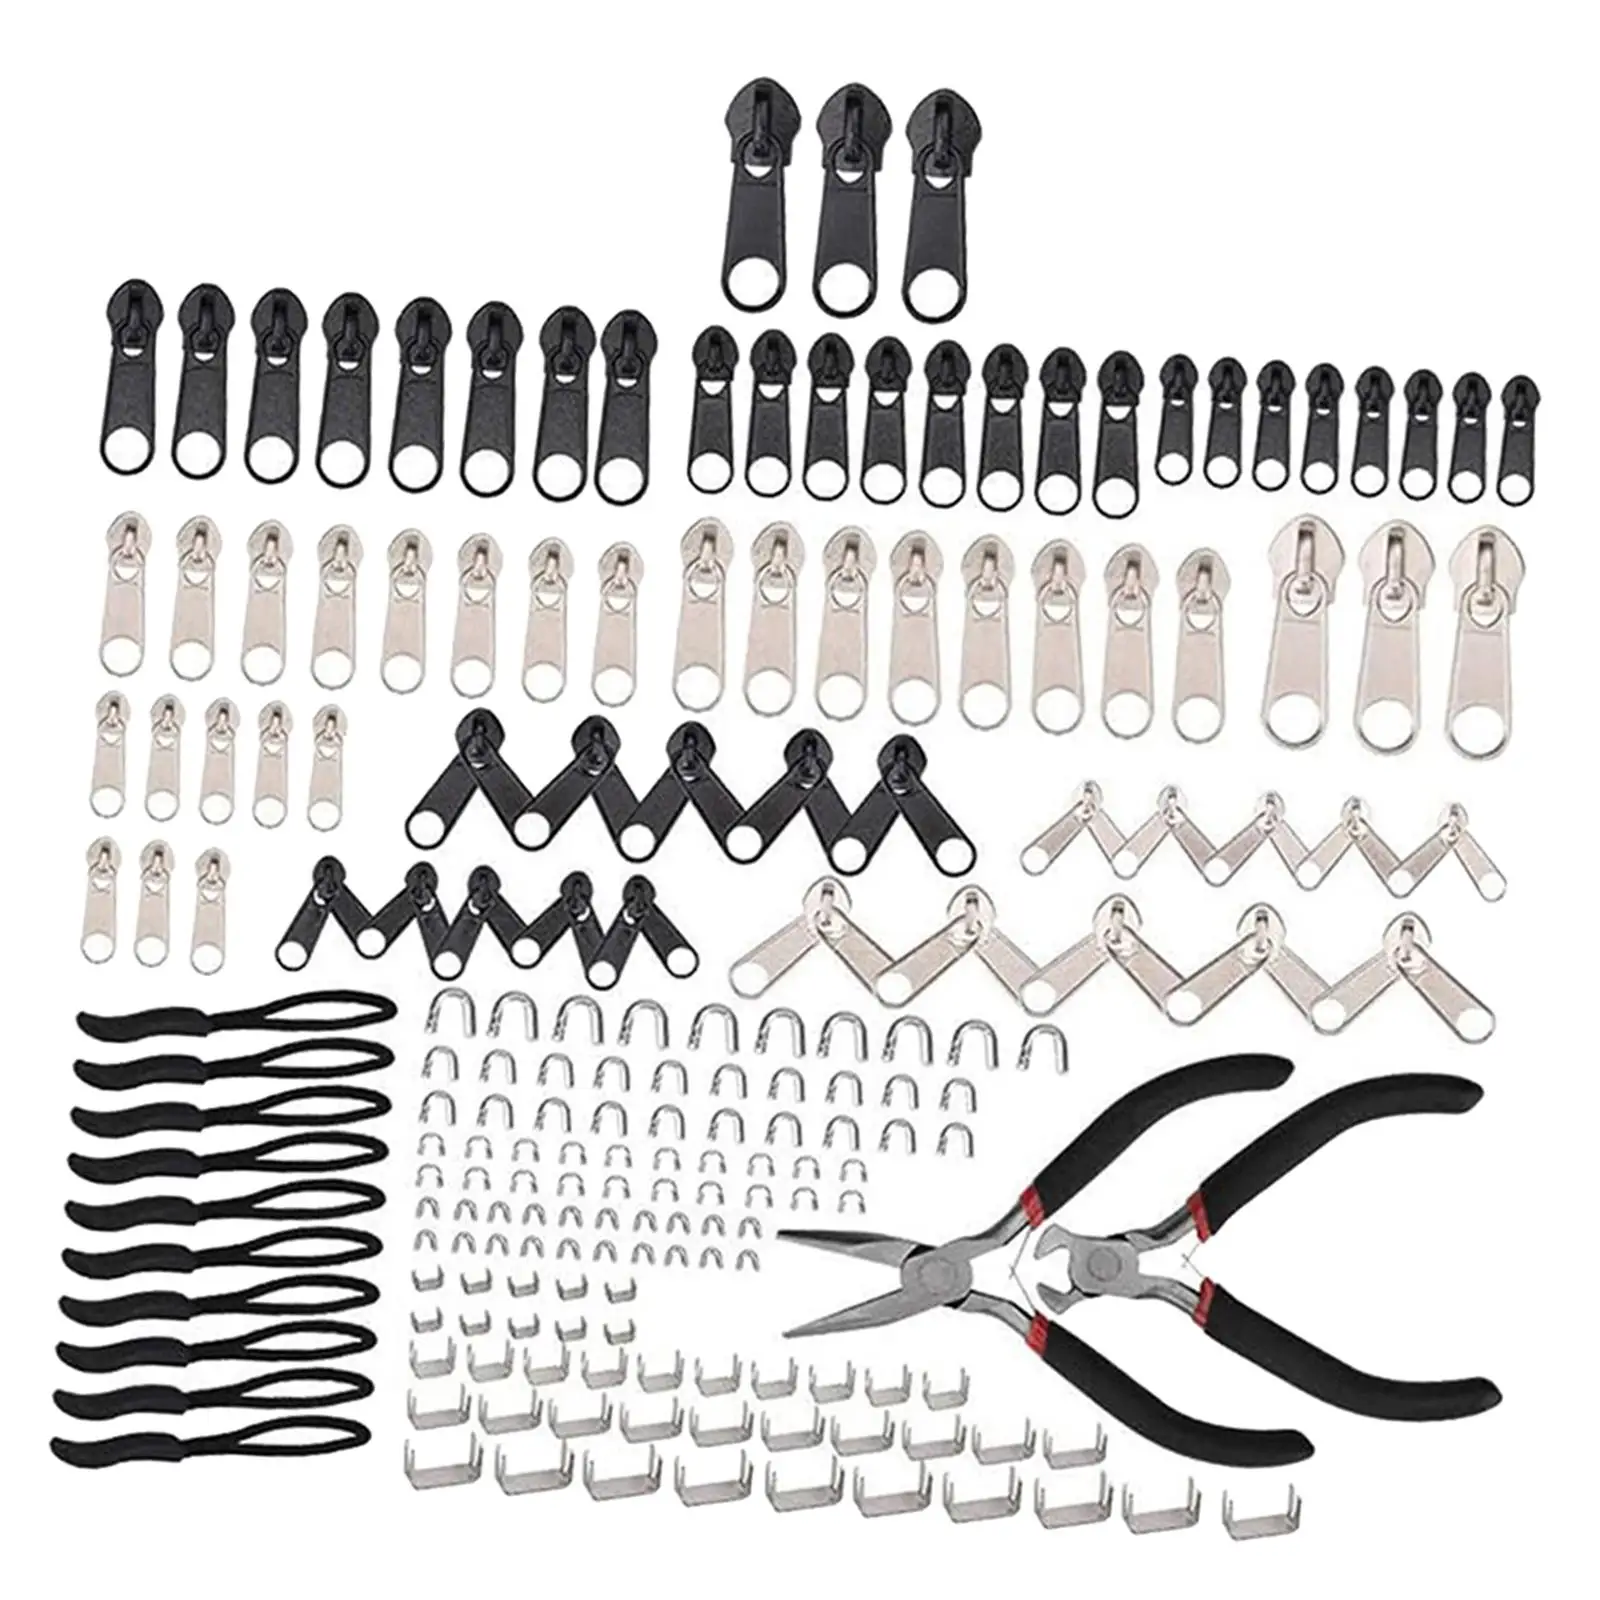 197x Fix Zippers Repair Kits with Install Pliers Zipper Replacement Instant Zipper for Backpack Clothes Tents Handbags Jackets